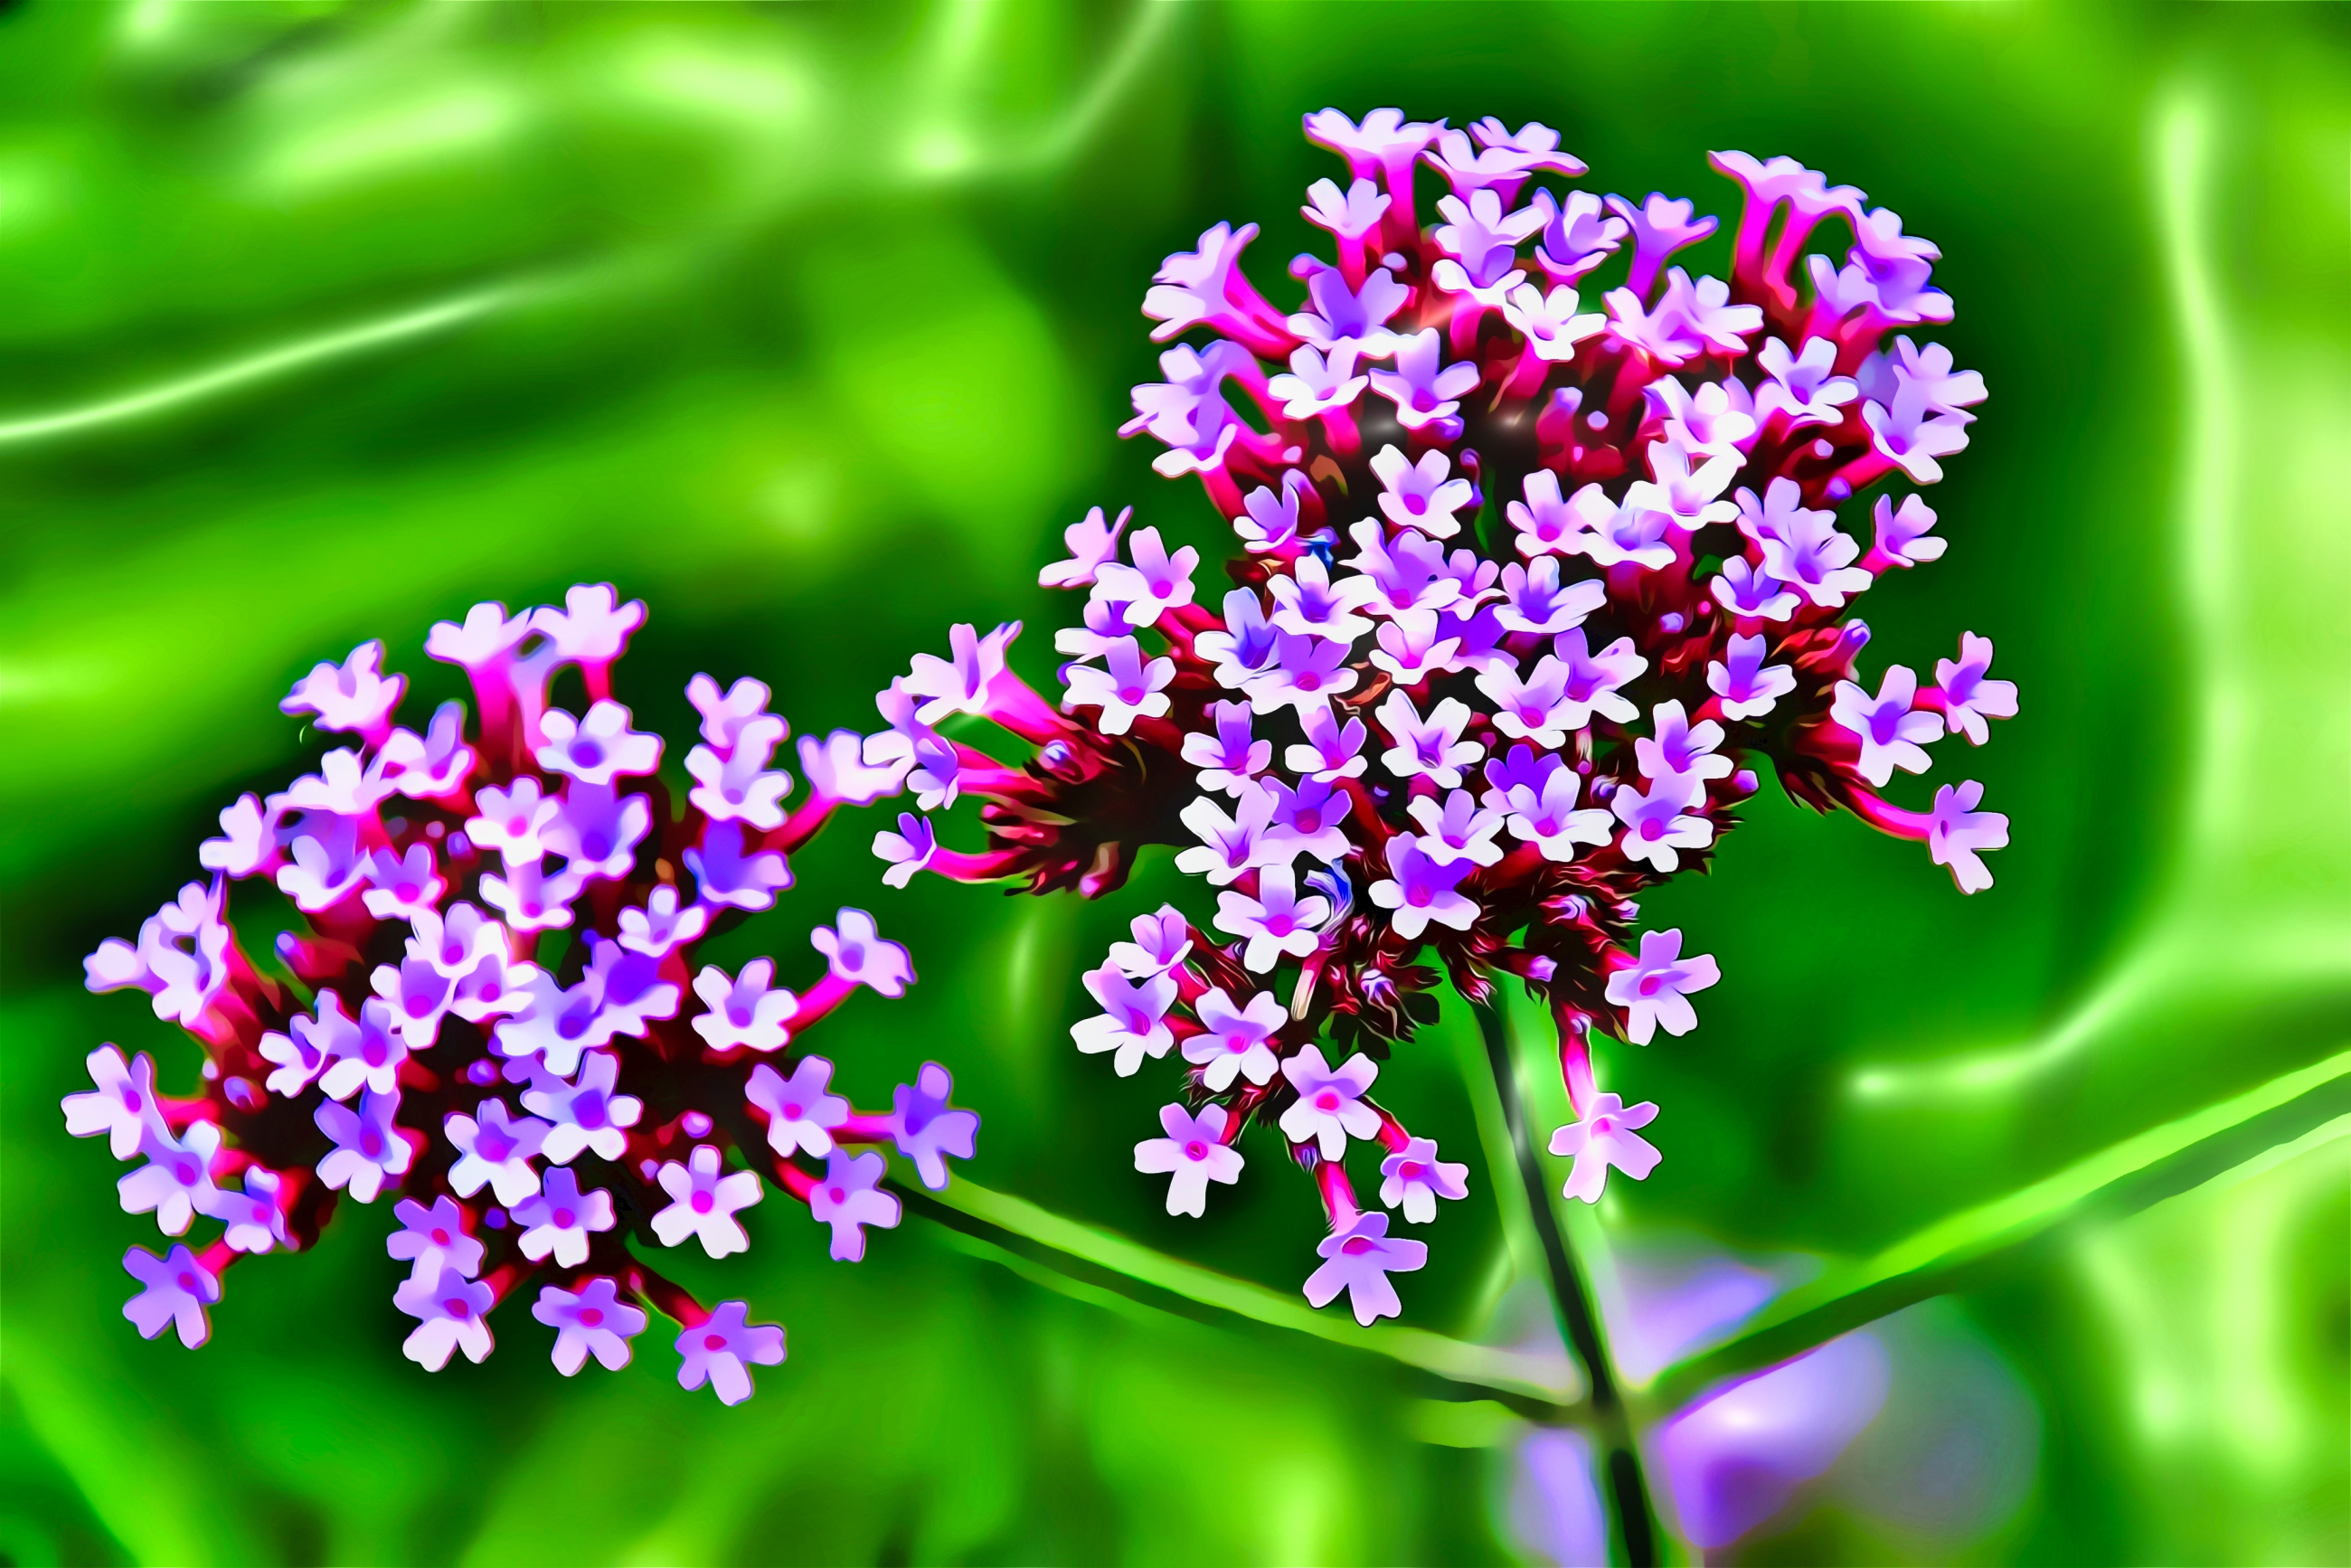 Artwork Flowers Painting Nature Plants Wildflowers Grass Macro Landscape Blooming Blossom 2600x1734